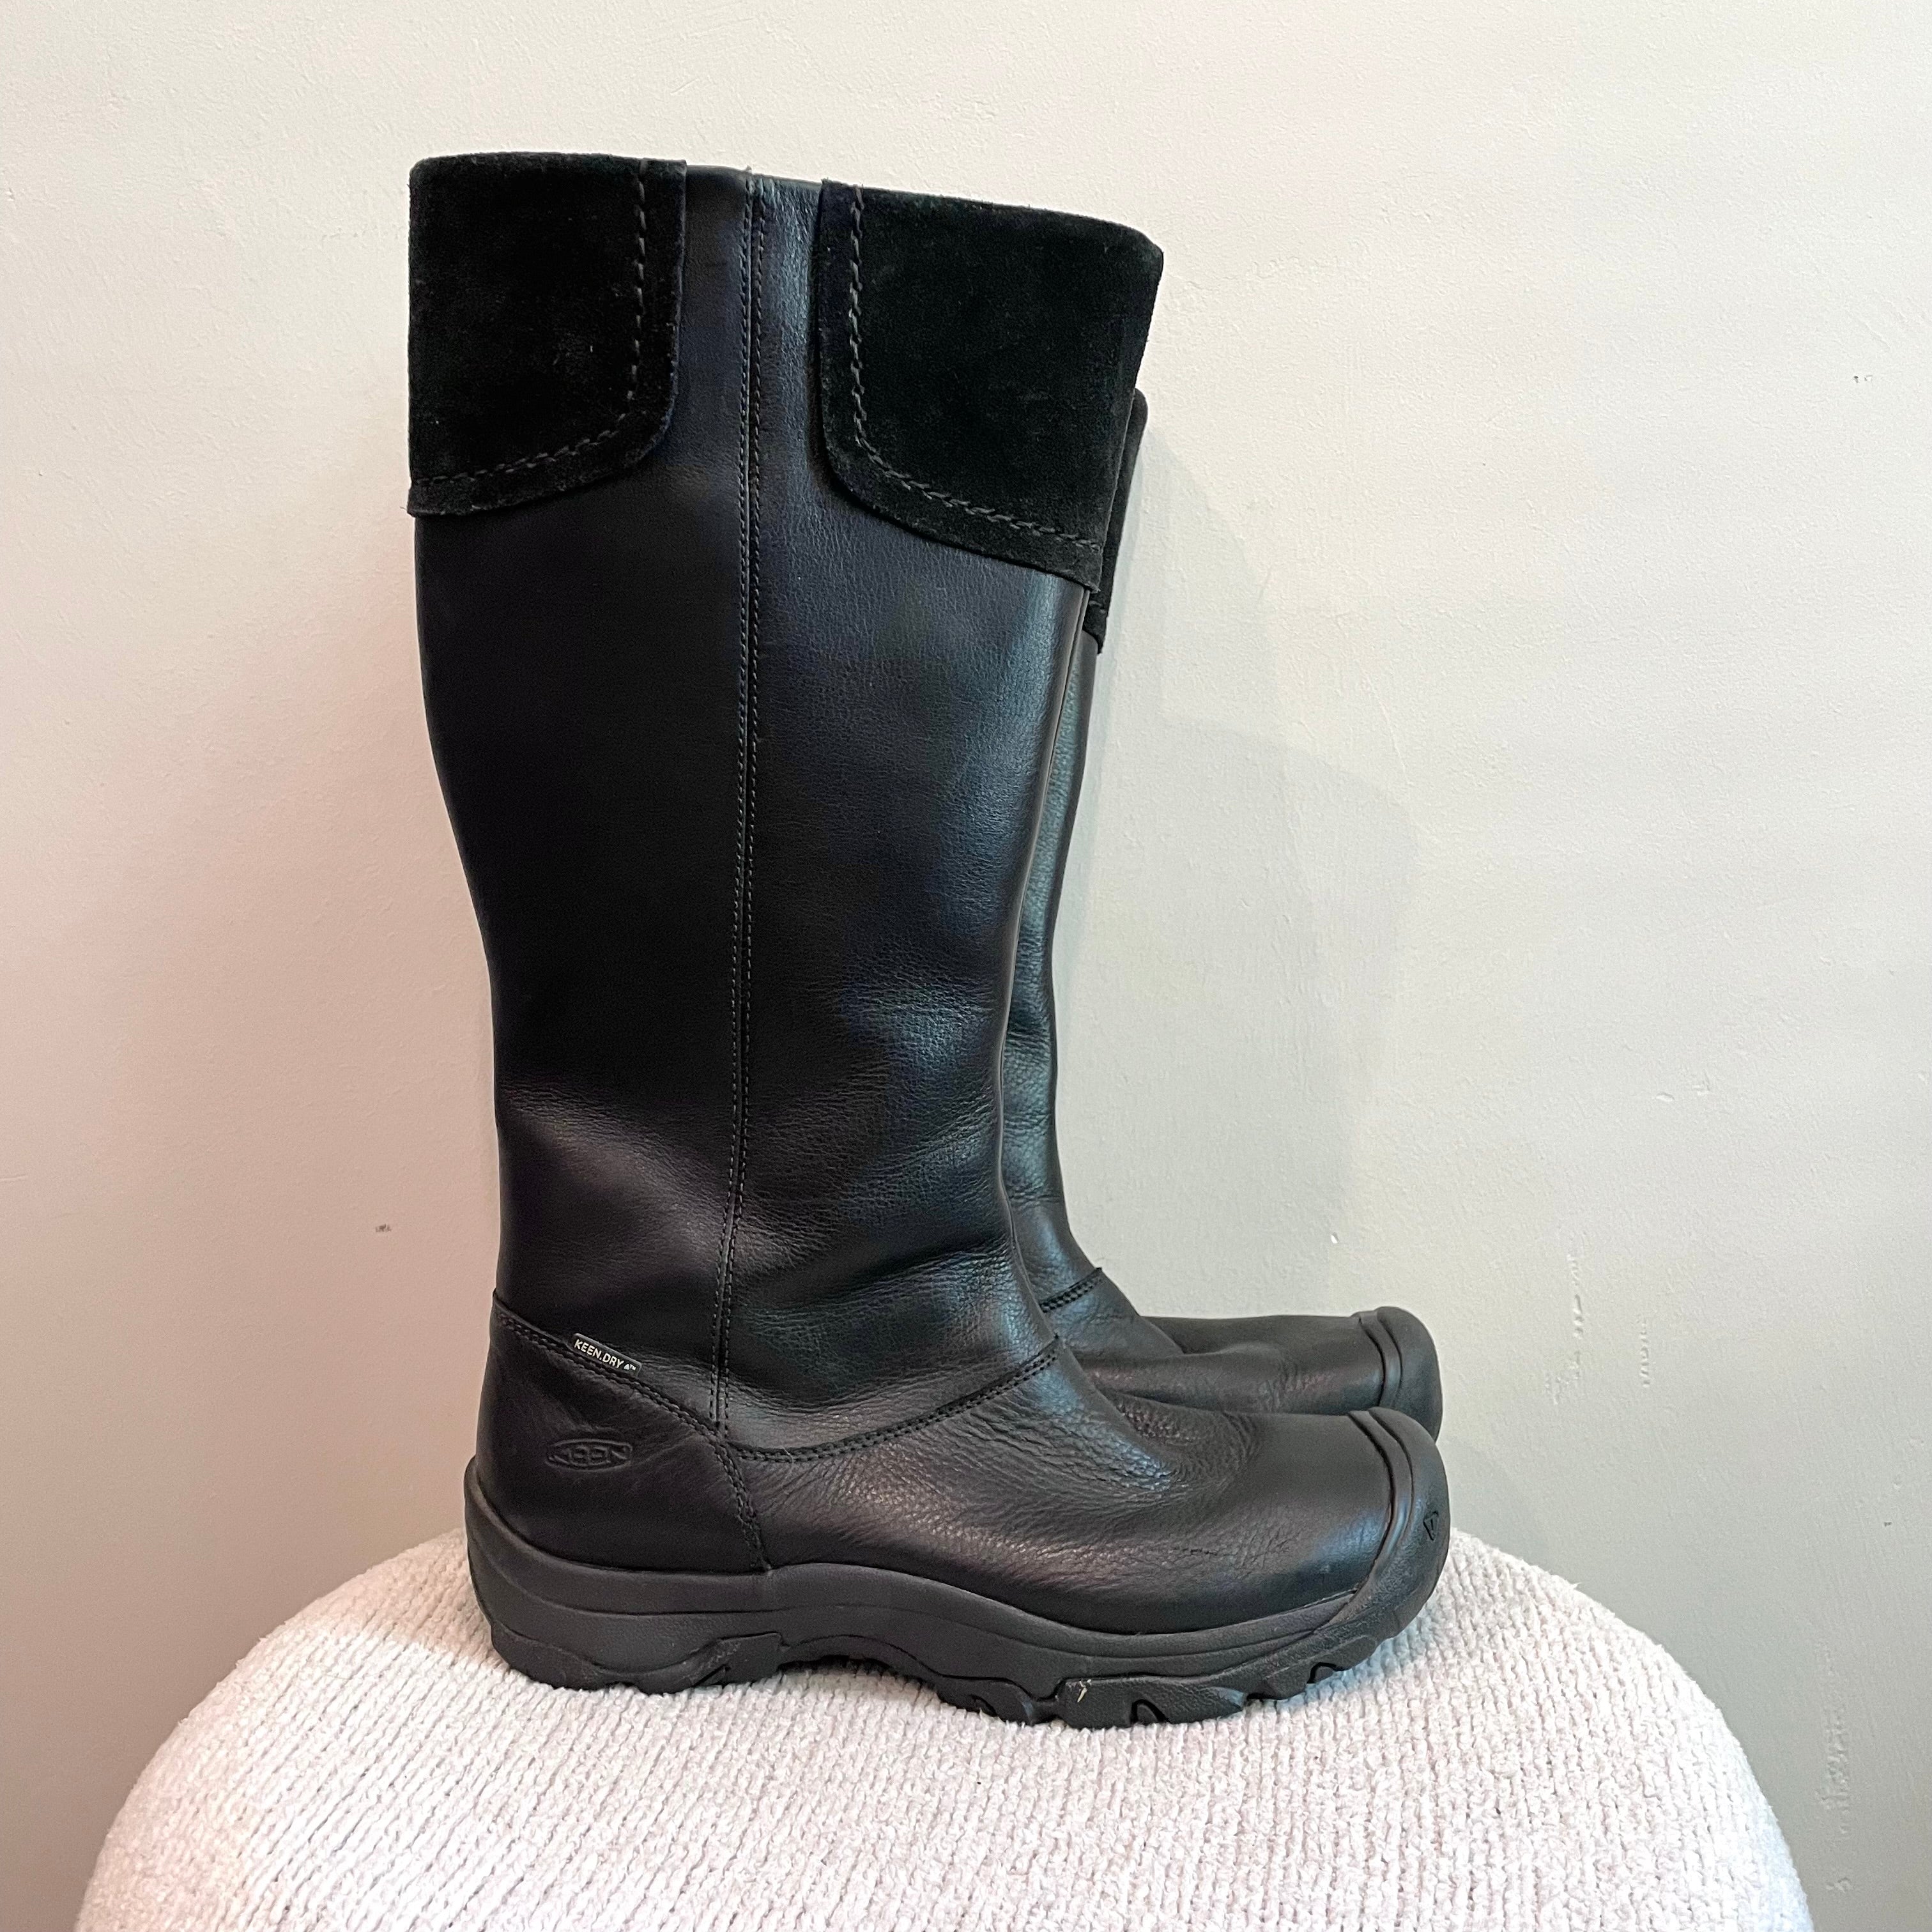 Winter Insulated Leather Boots